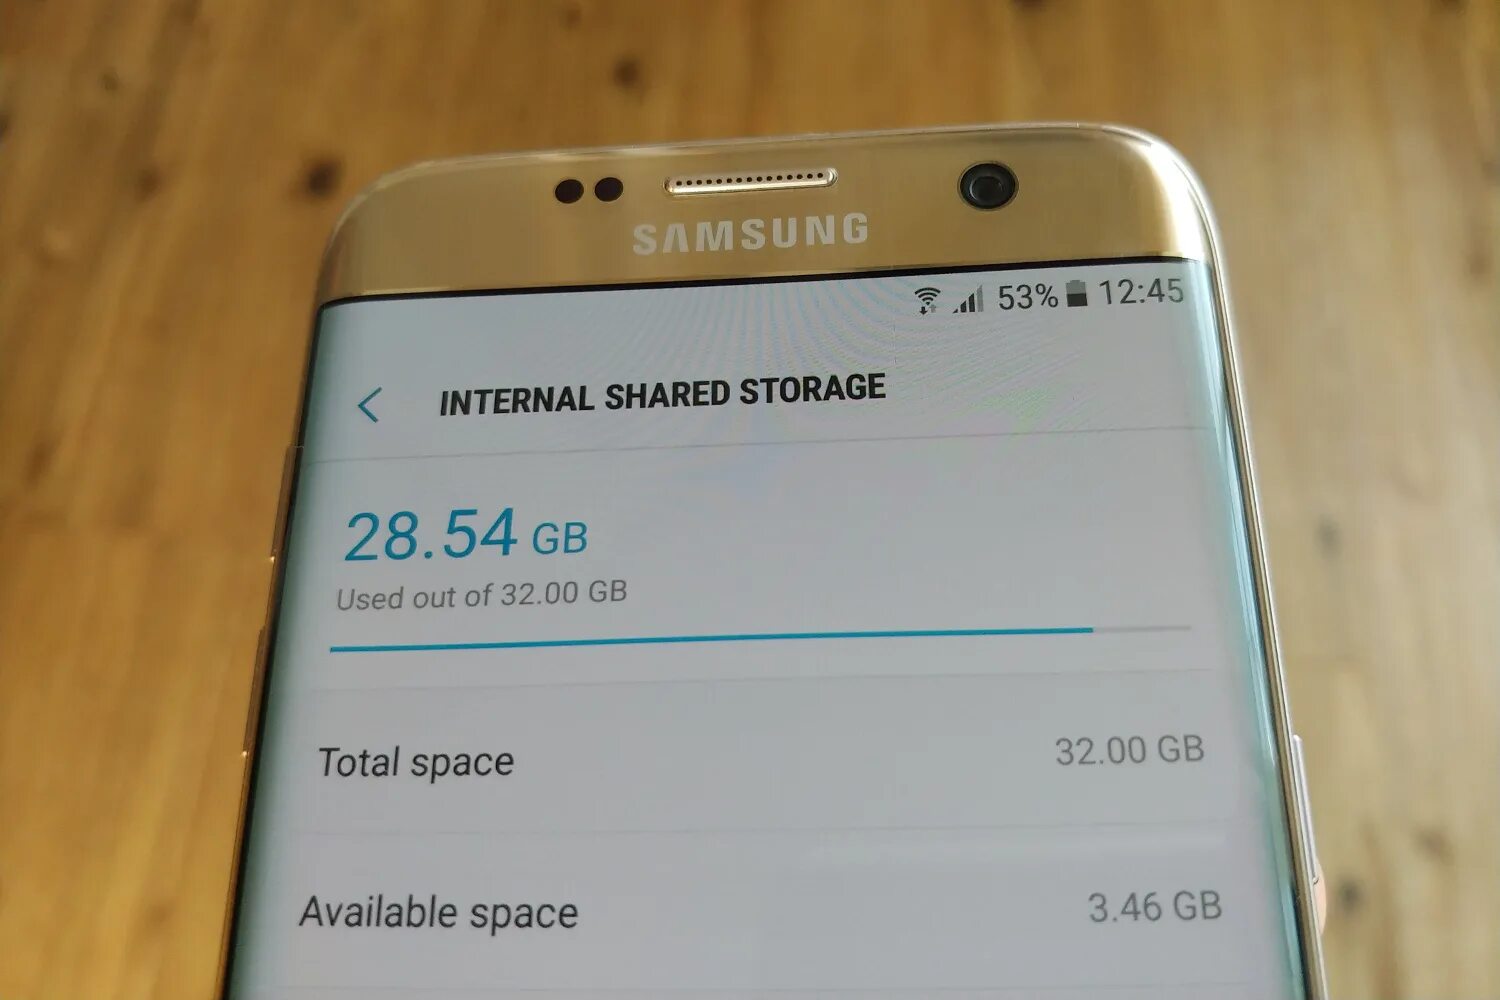 Storage Internal Android. Internal Storage Android Full. Samsung expand the Storage. Phone Storage Full Android. Internal space